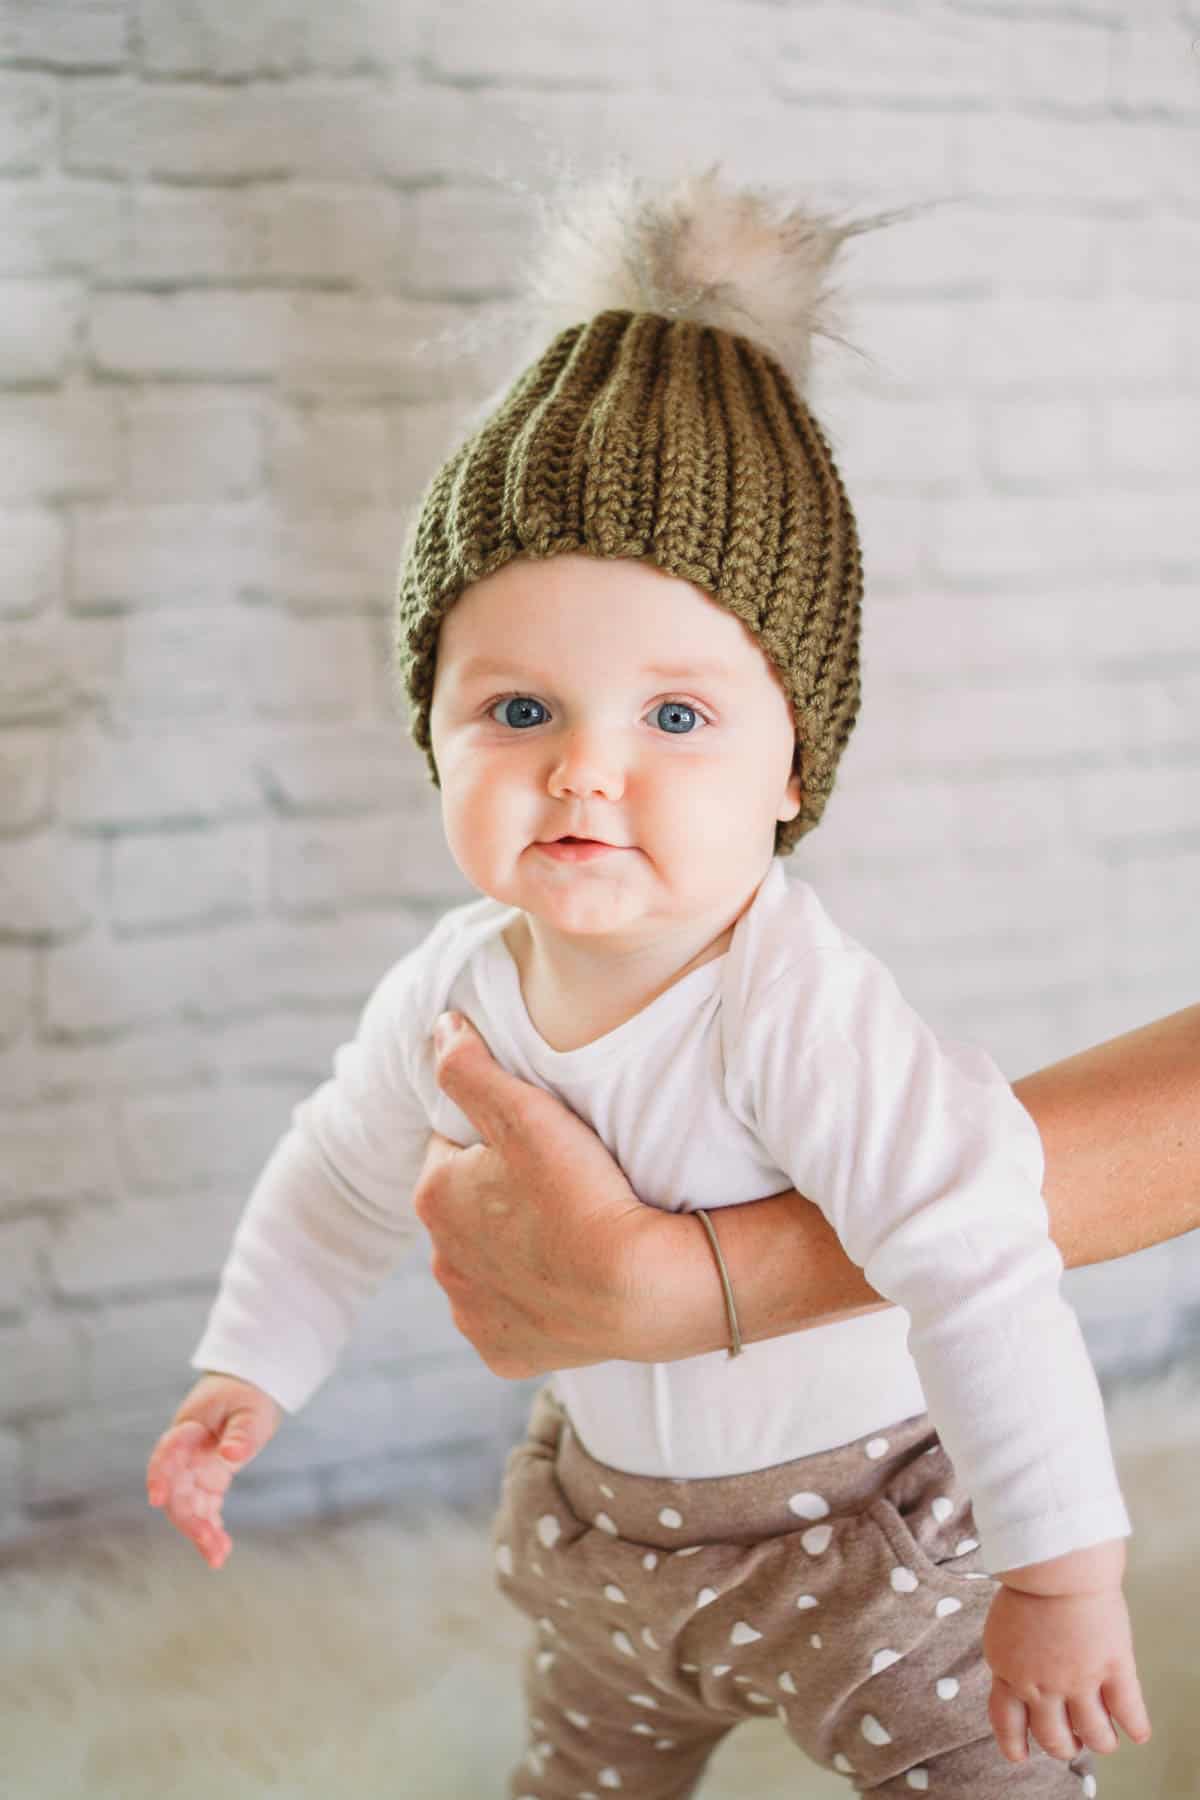 Baby wearing a modern, ribbed crochet beanie hat with fur pom pom on top.